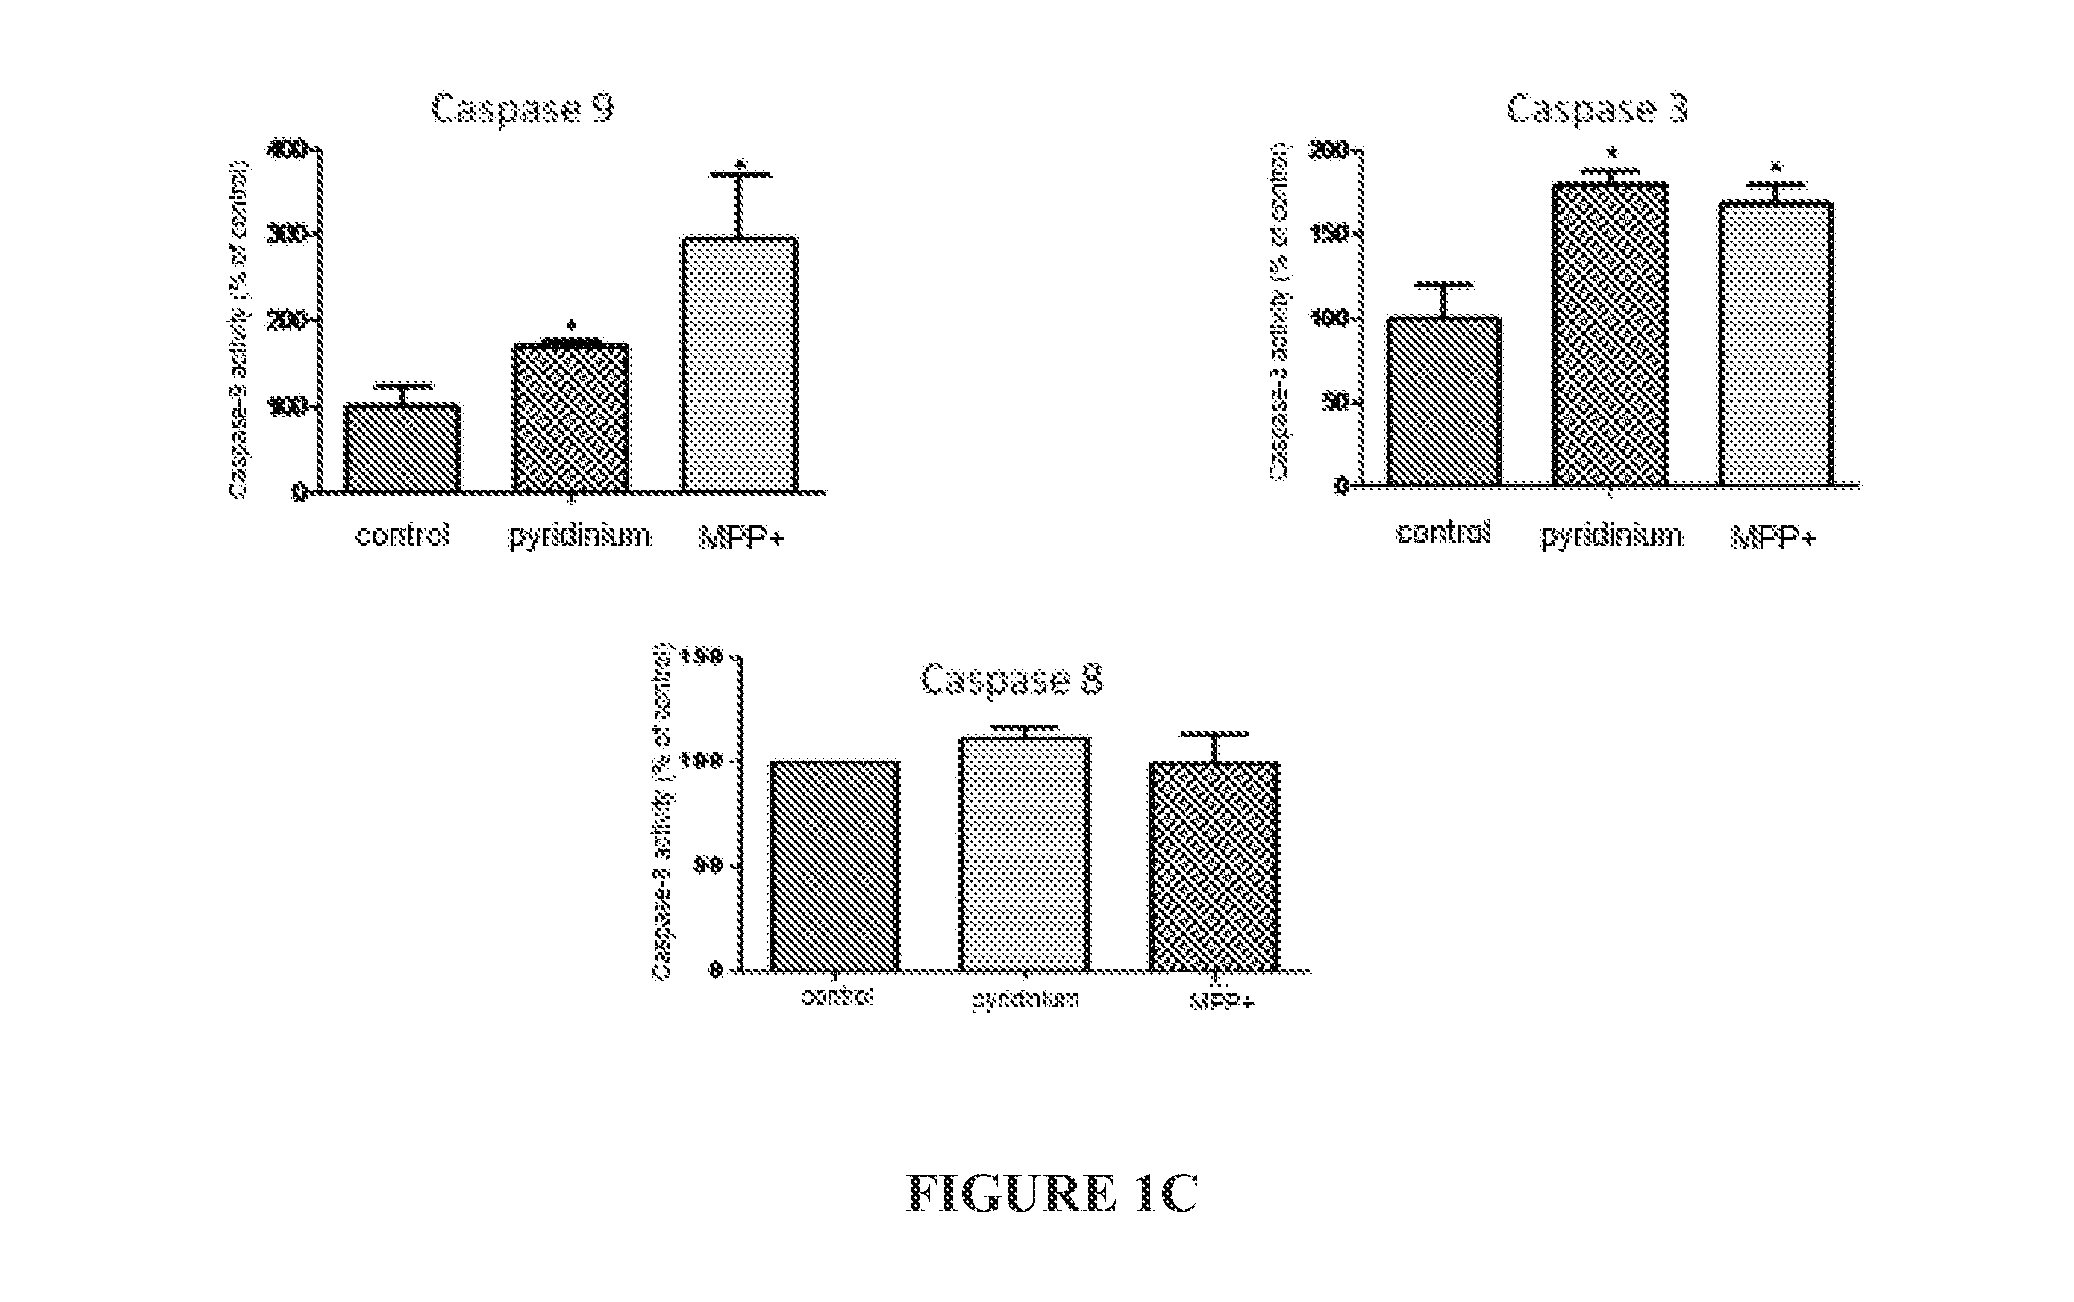 Chemical model of a neurodegenerative disease, method for preparation and uses of same